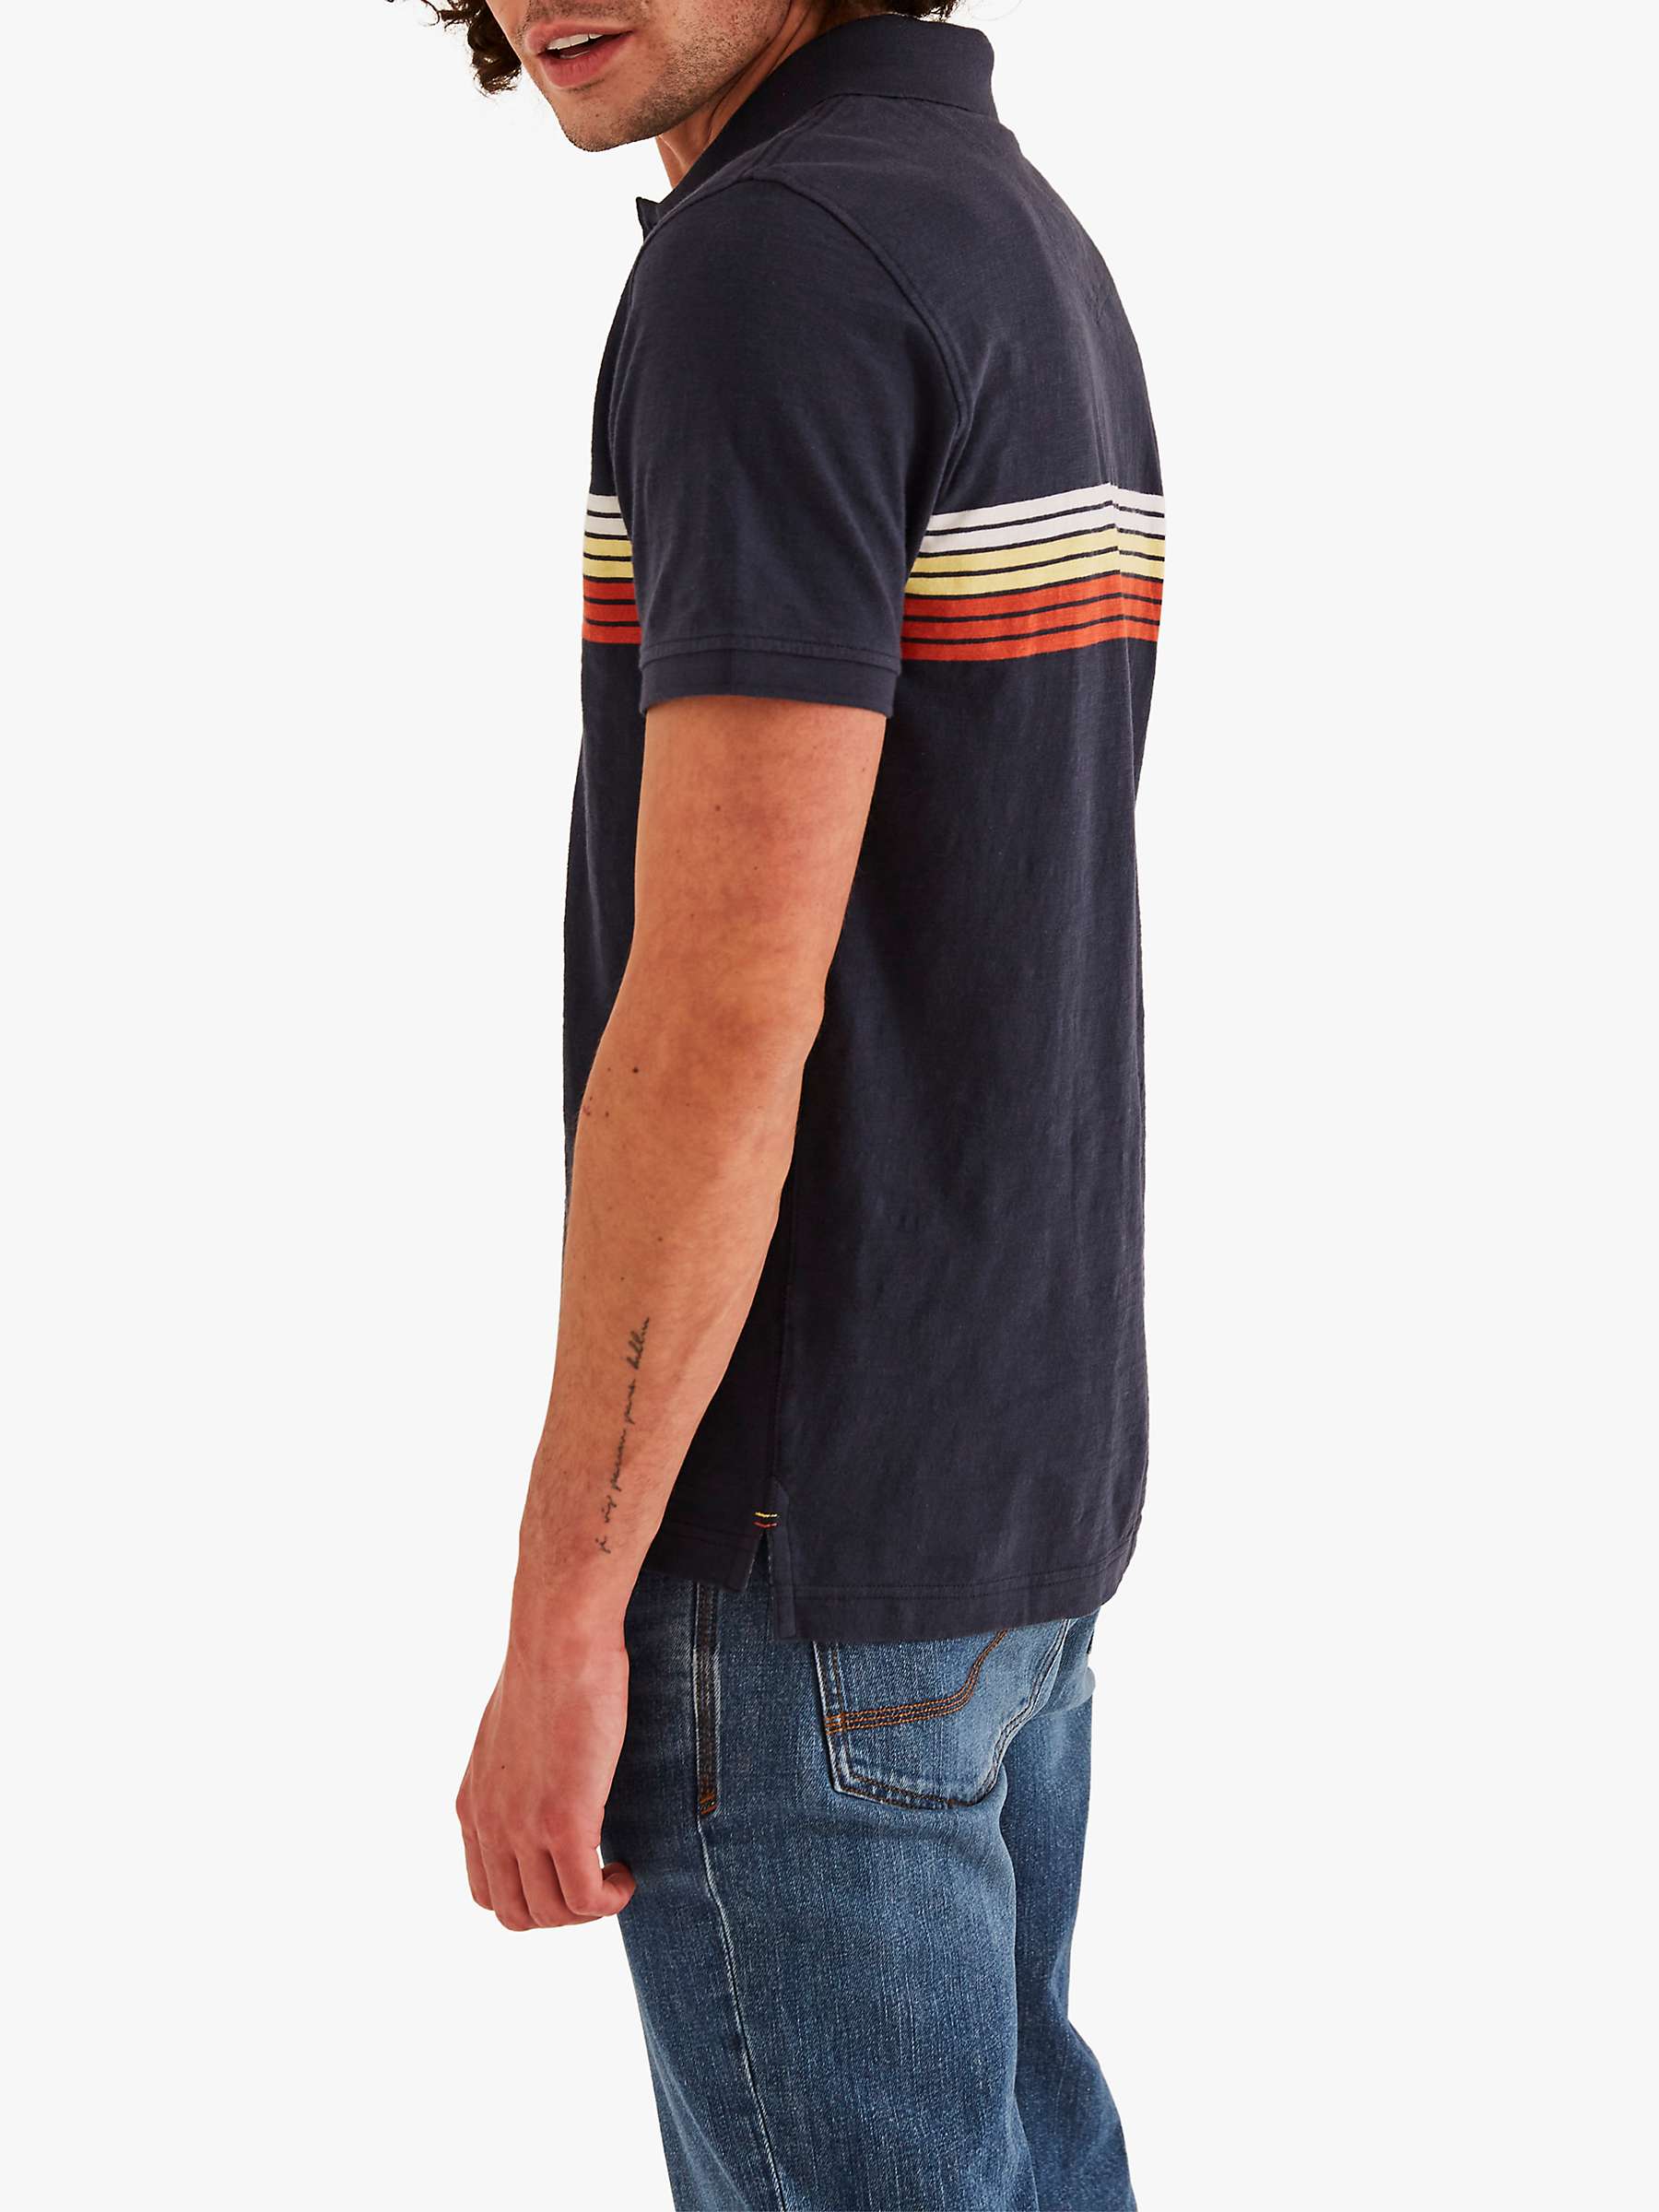 Buy FatFace Vintage Stripe Polo Top, Air Force Online at johnlewis.com